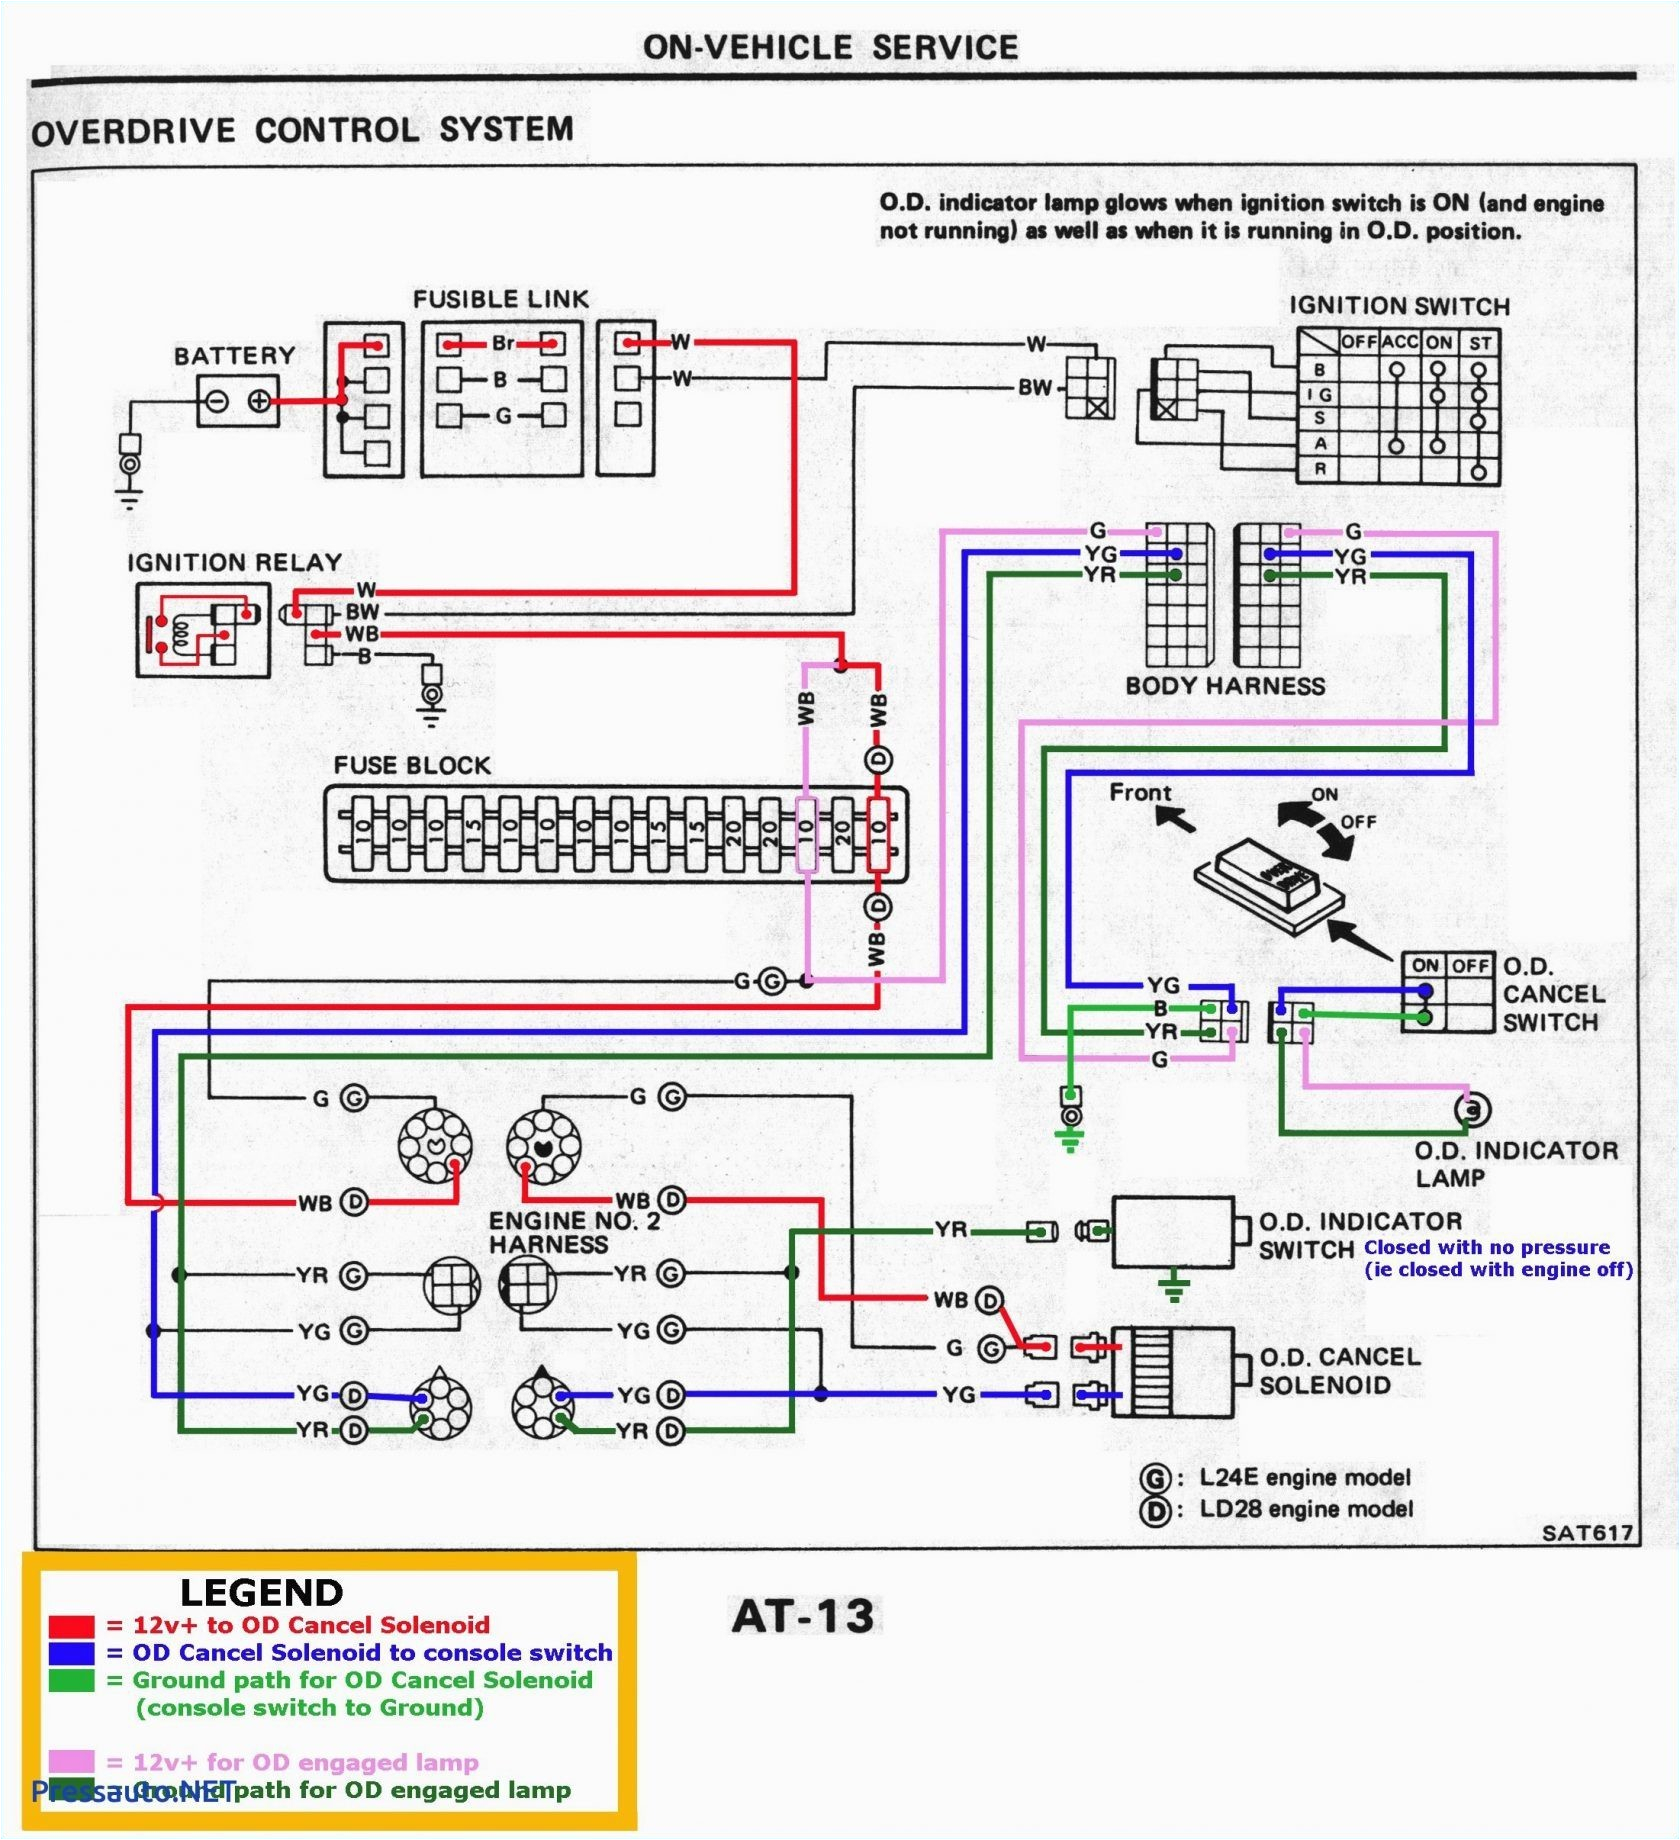 wiring diagram for 1996 toyota tacoma wiring diagram compilationwiring diagram for a 2007 toyota tacoma get